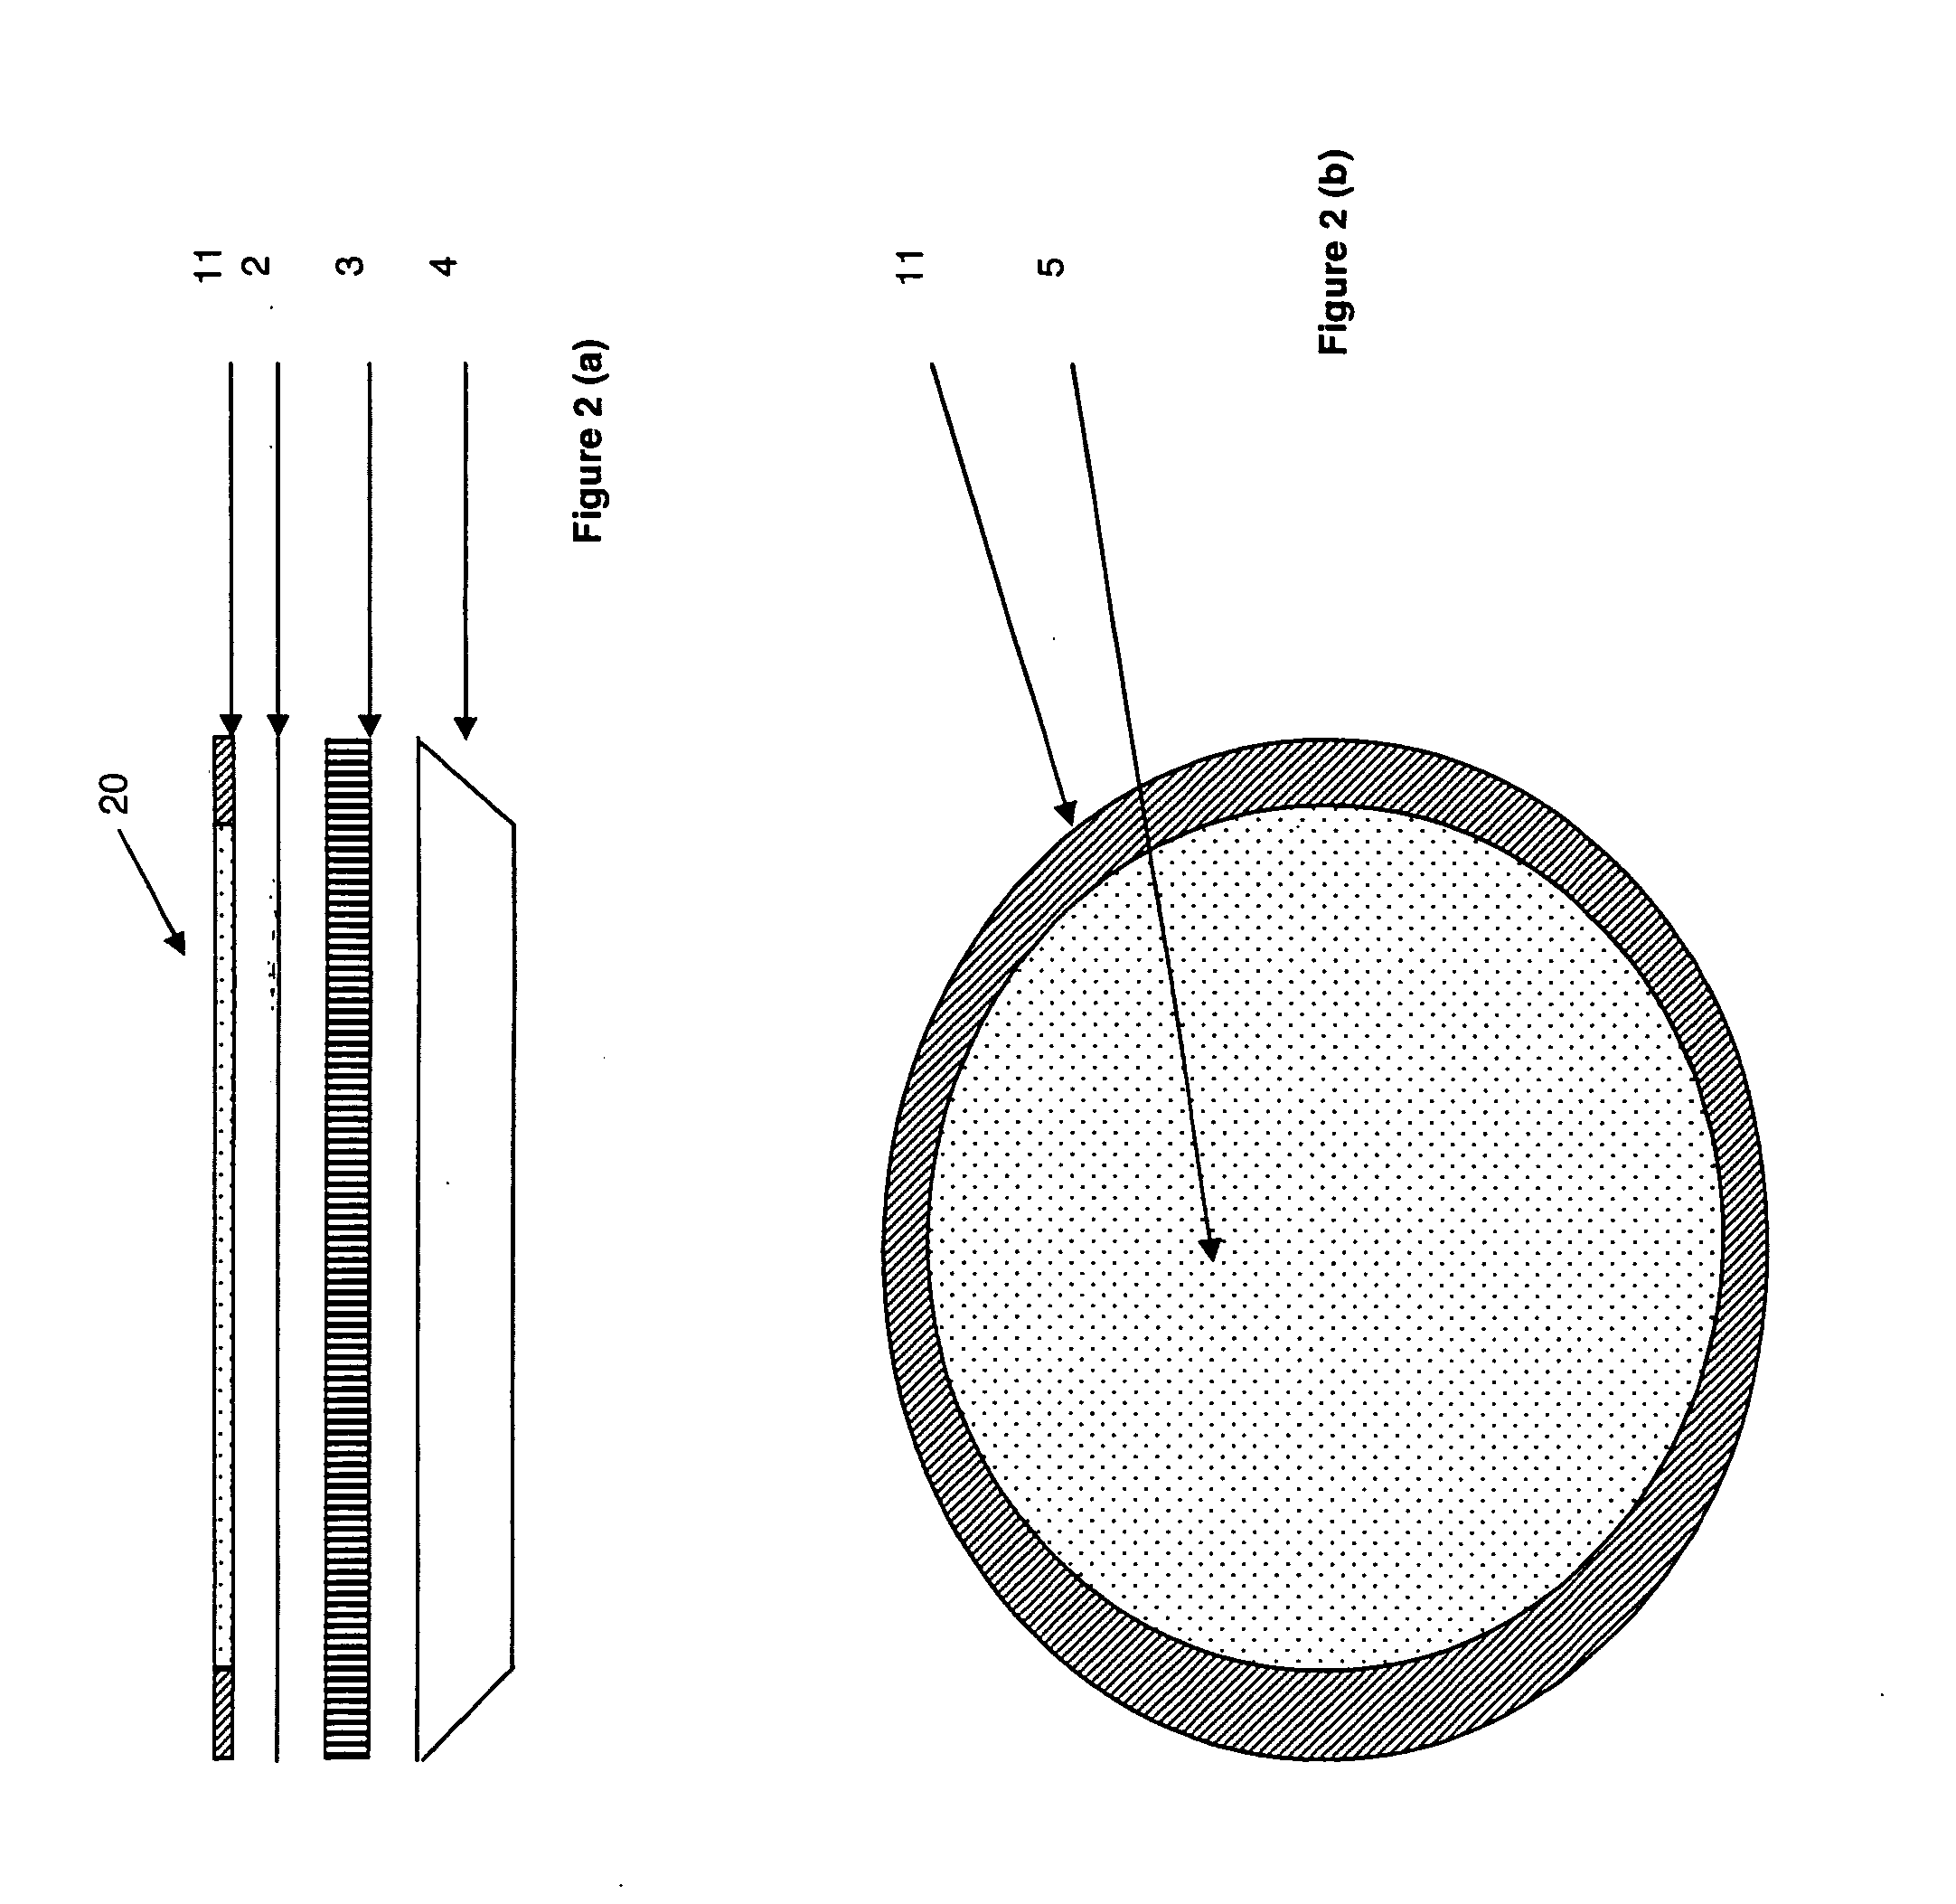 Clamp for use in processing semiconductor workpieces